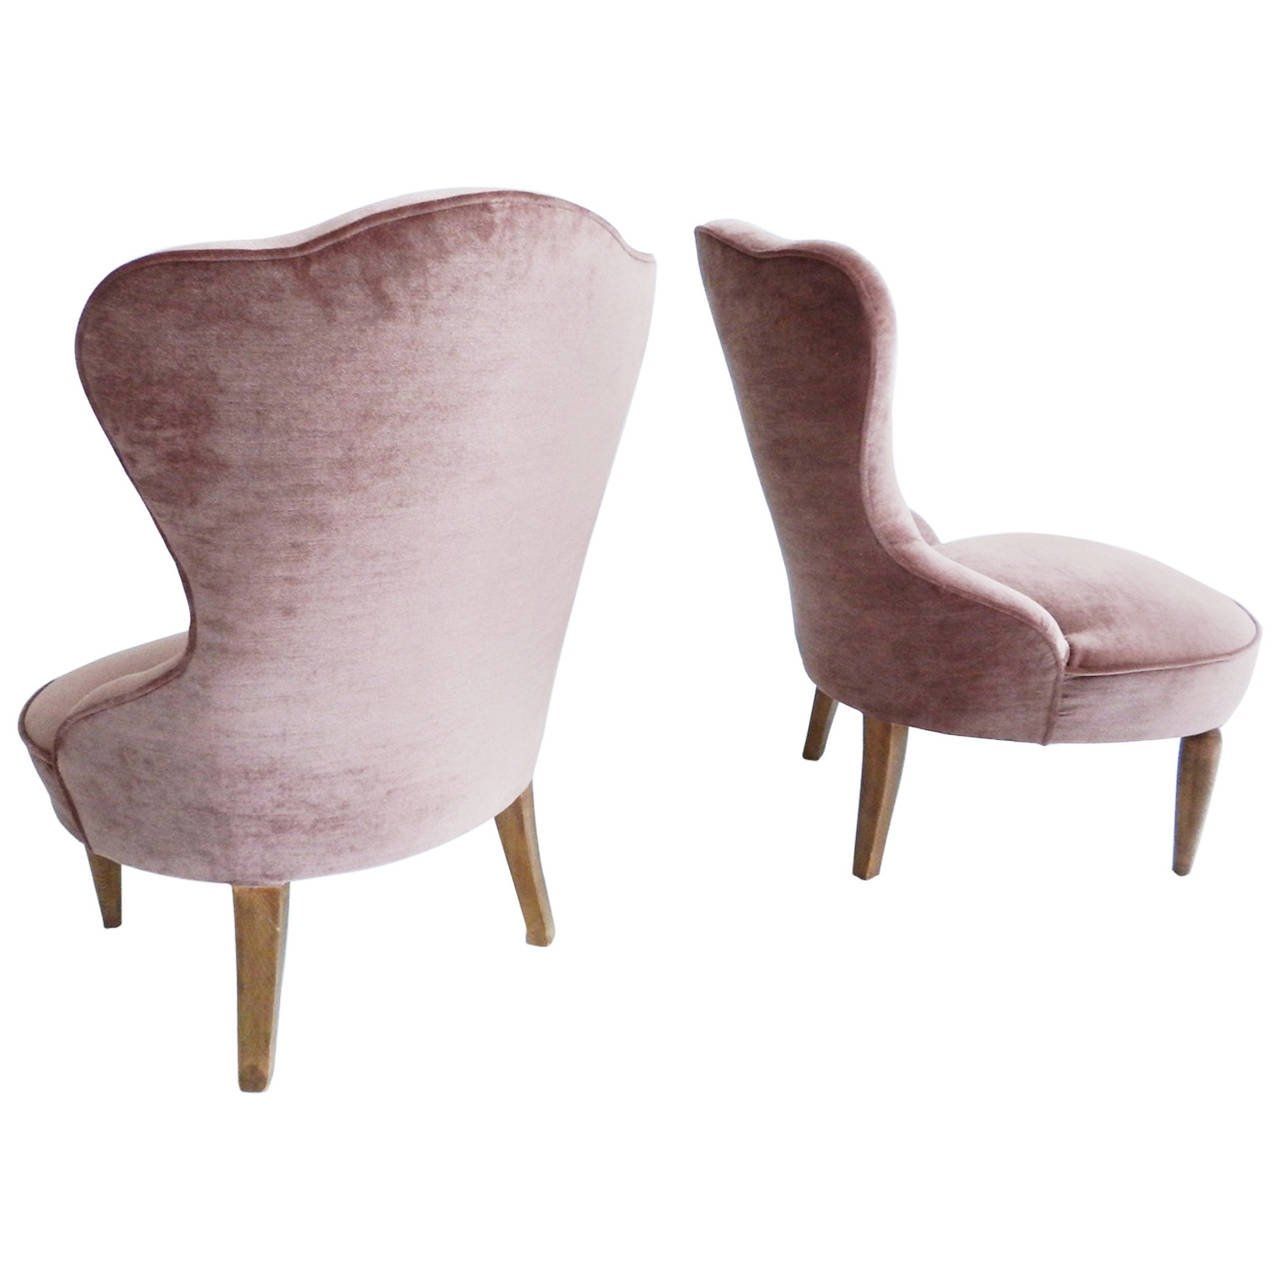 Small Room Armchairs New Cover In Dust Rose Velvet At 1stdibs Throughout Small Armchairs (View 5 of 15)